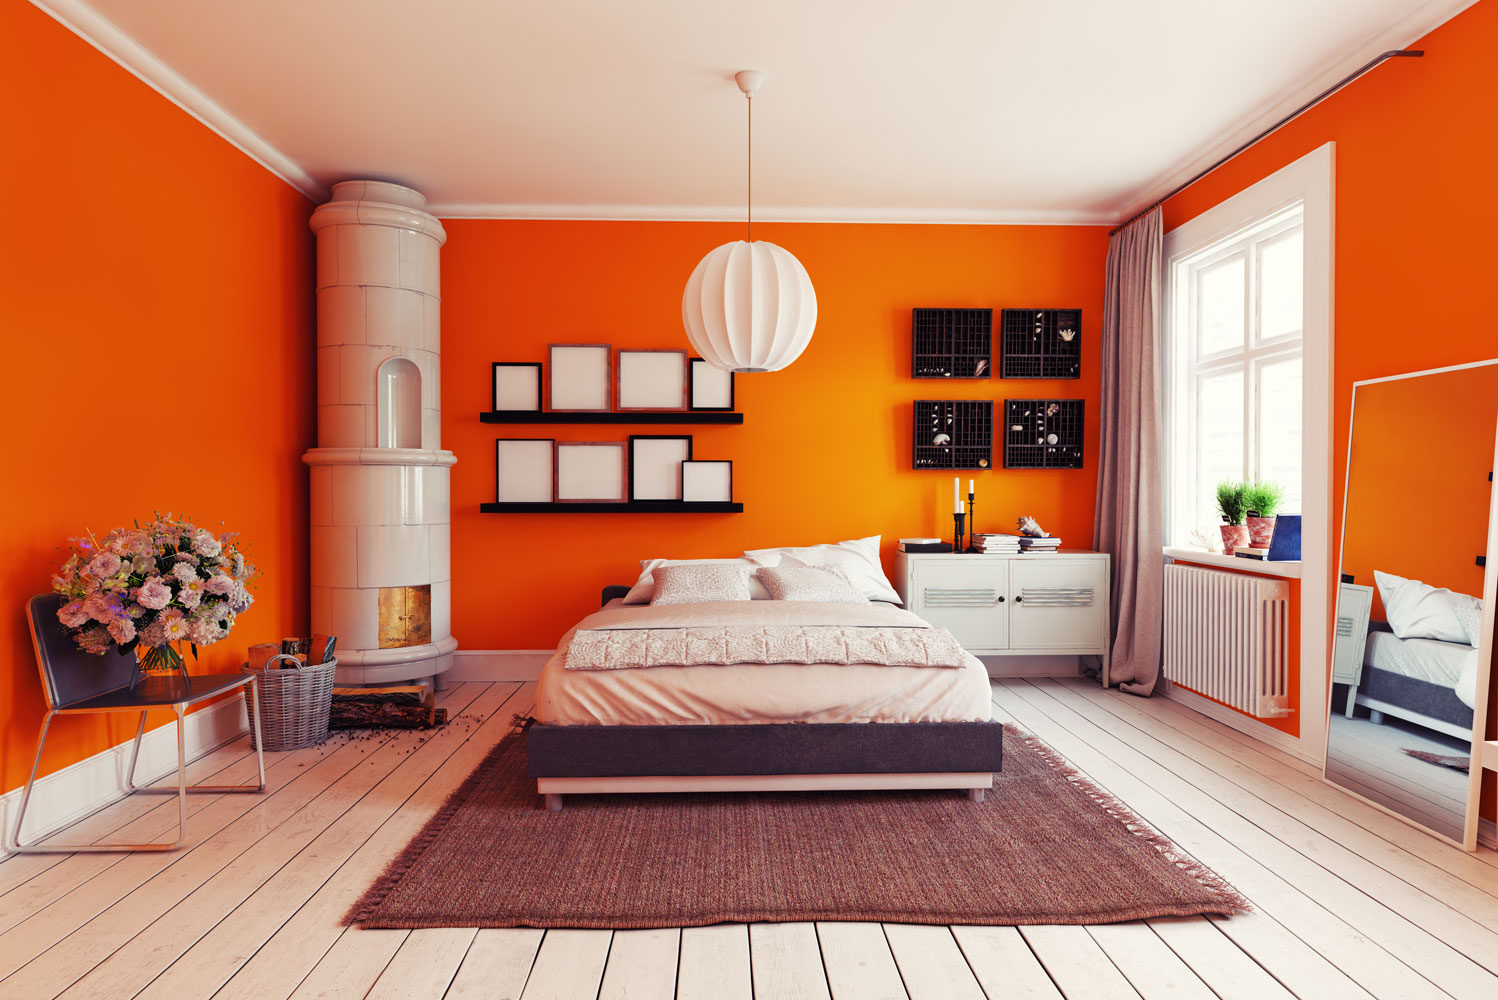 Orange painted walls inside a spacious bedroom with white flooring, a small fireplace on the side and white beddings